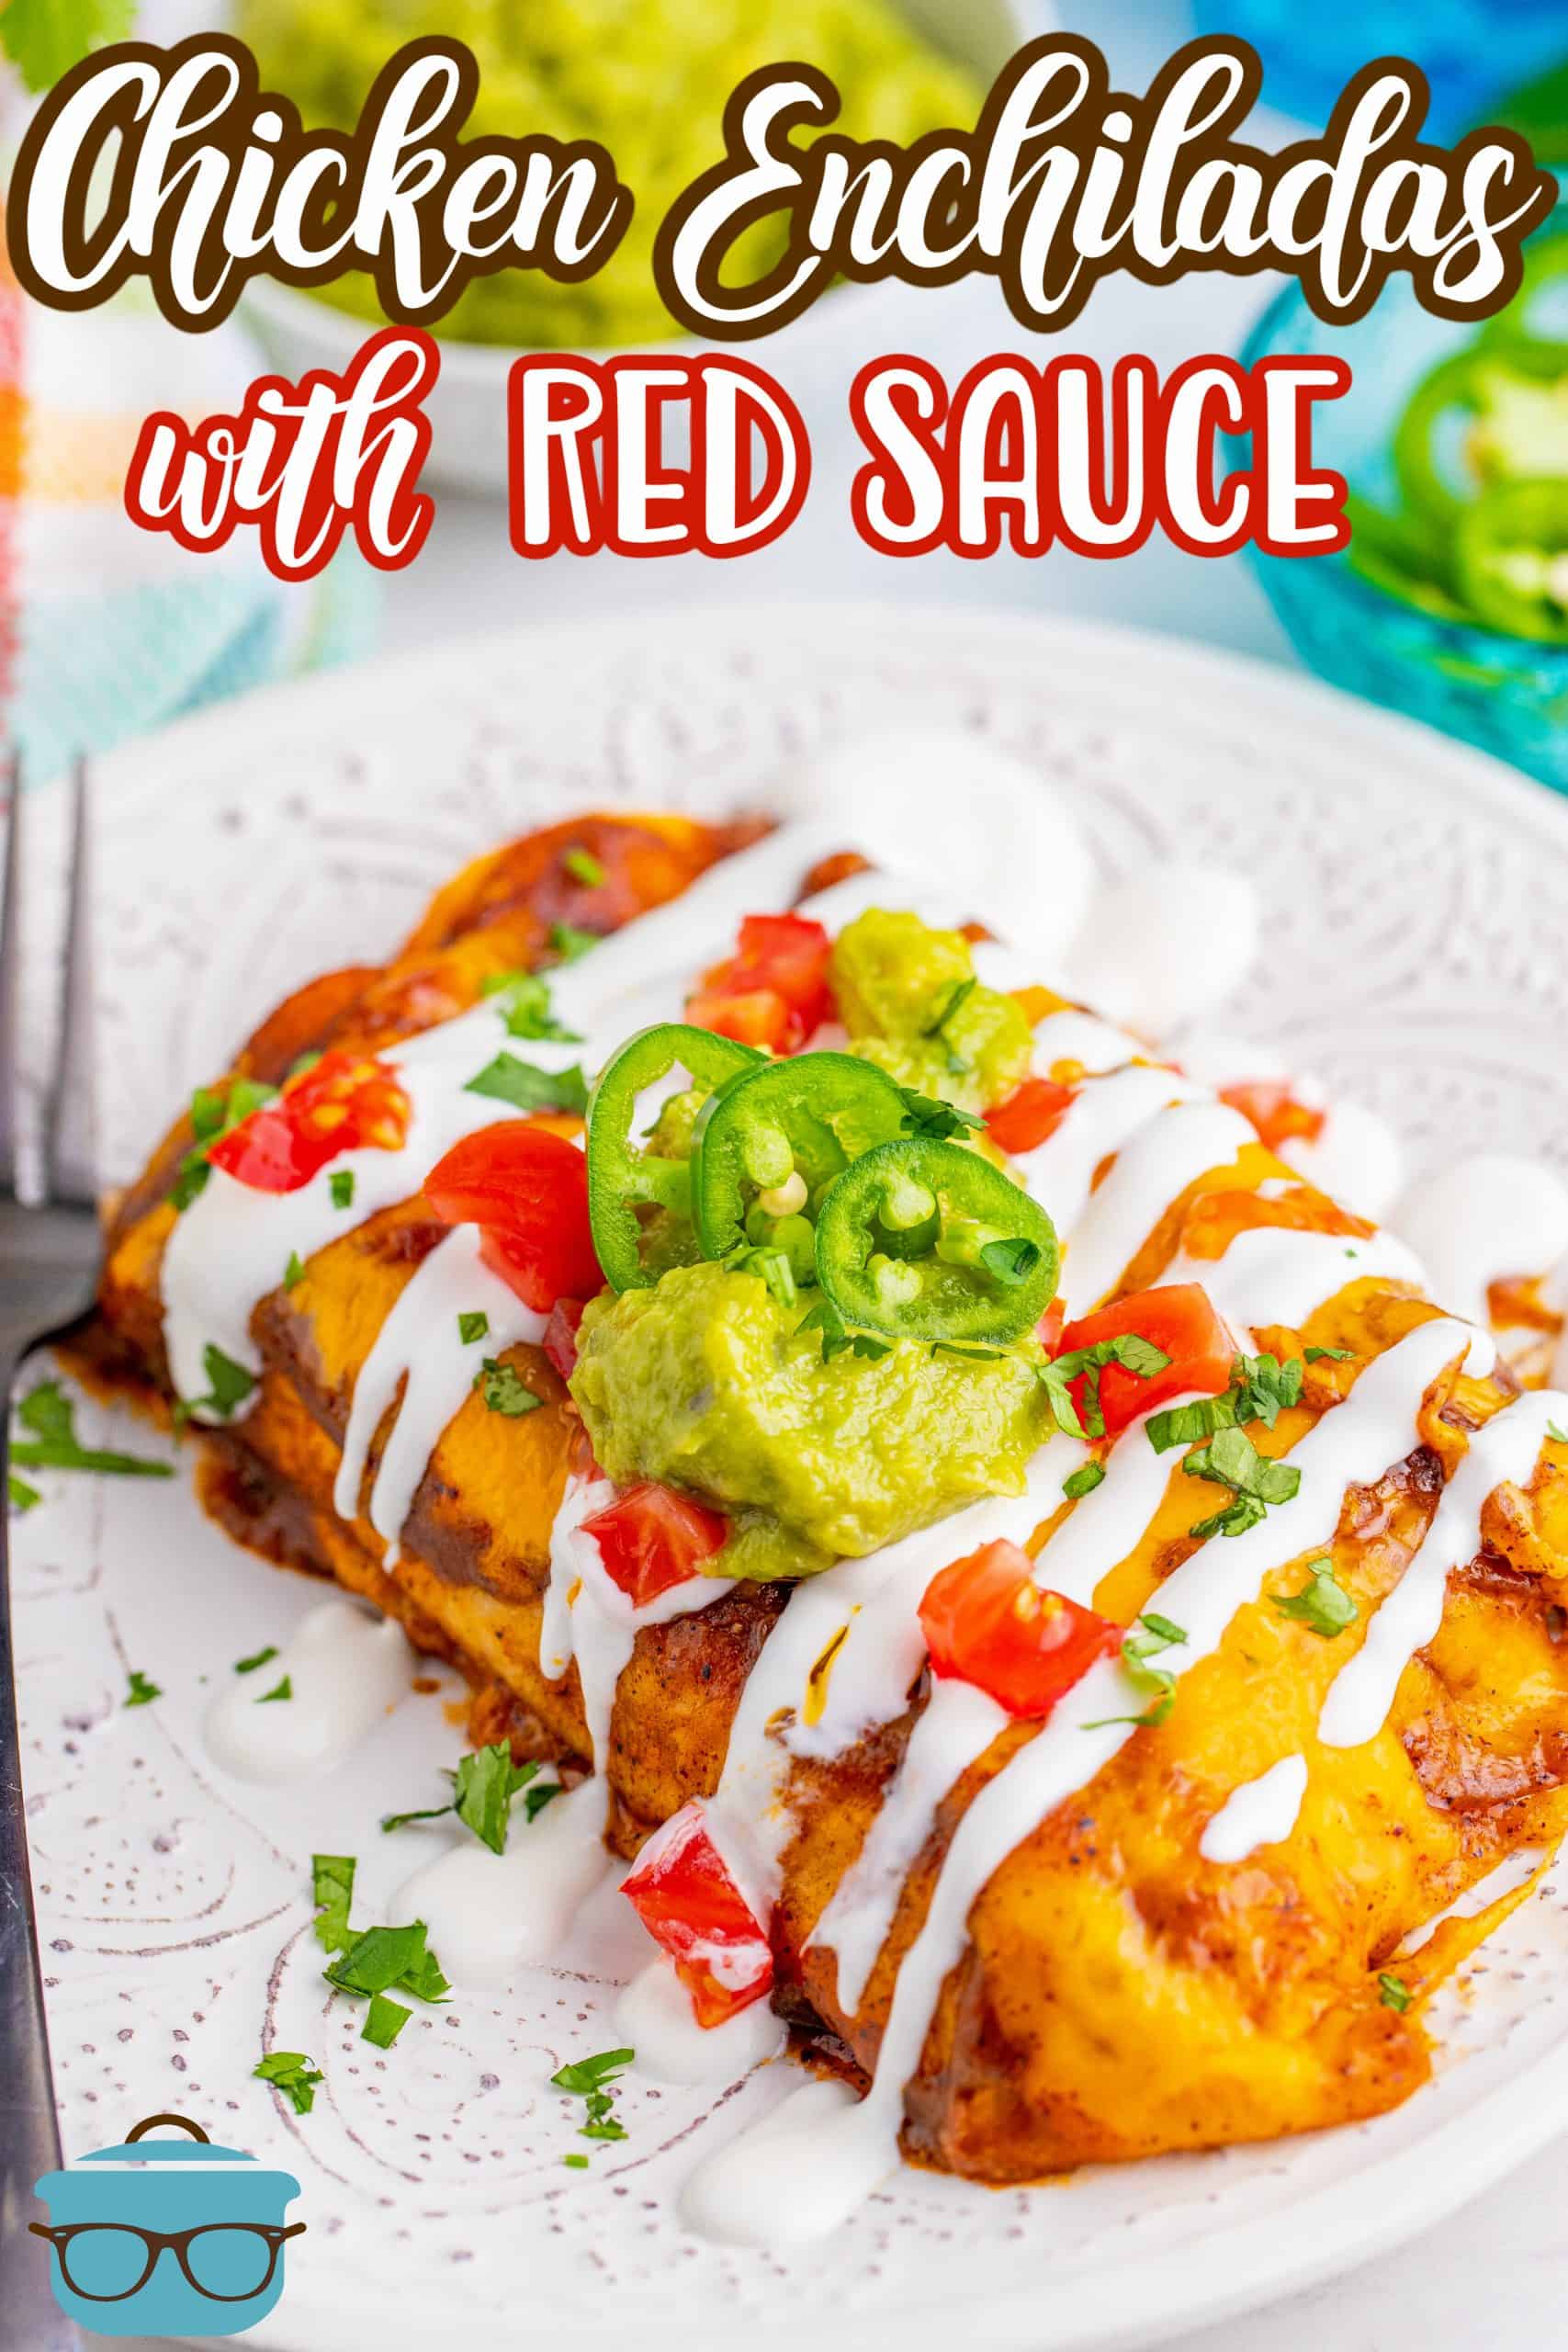 Cinco de Mayo Recipe Roundup, Chicken Enchiladas with homemade red enchilada sauce recipe from The Country Cook - two enchiladas shown on a white plate and topped with cream sauce, diced tomatoes, guacamole and fresh jalapeños